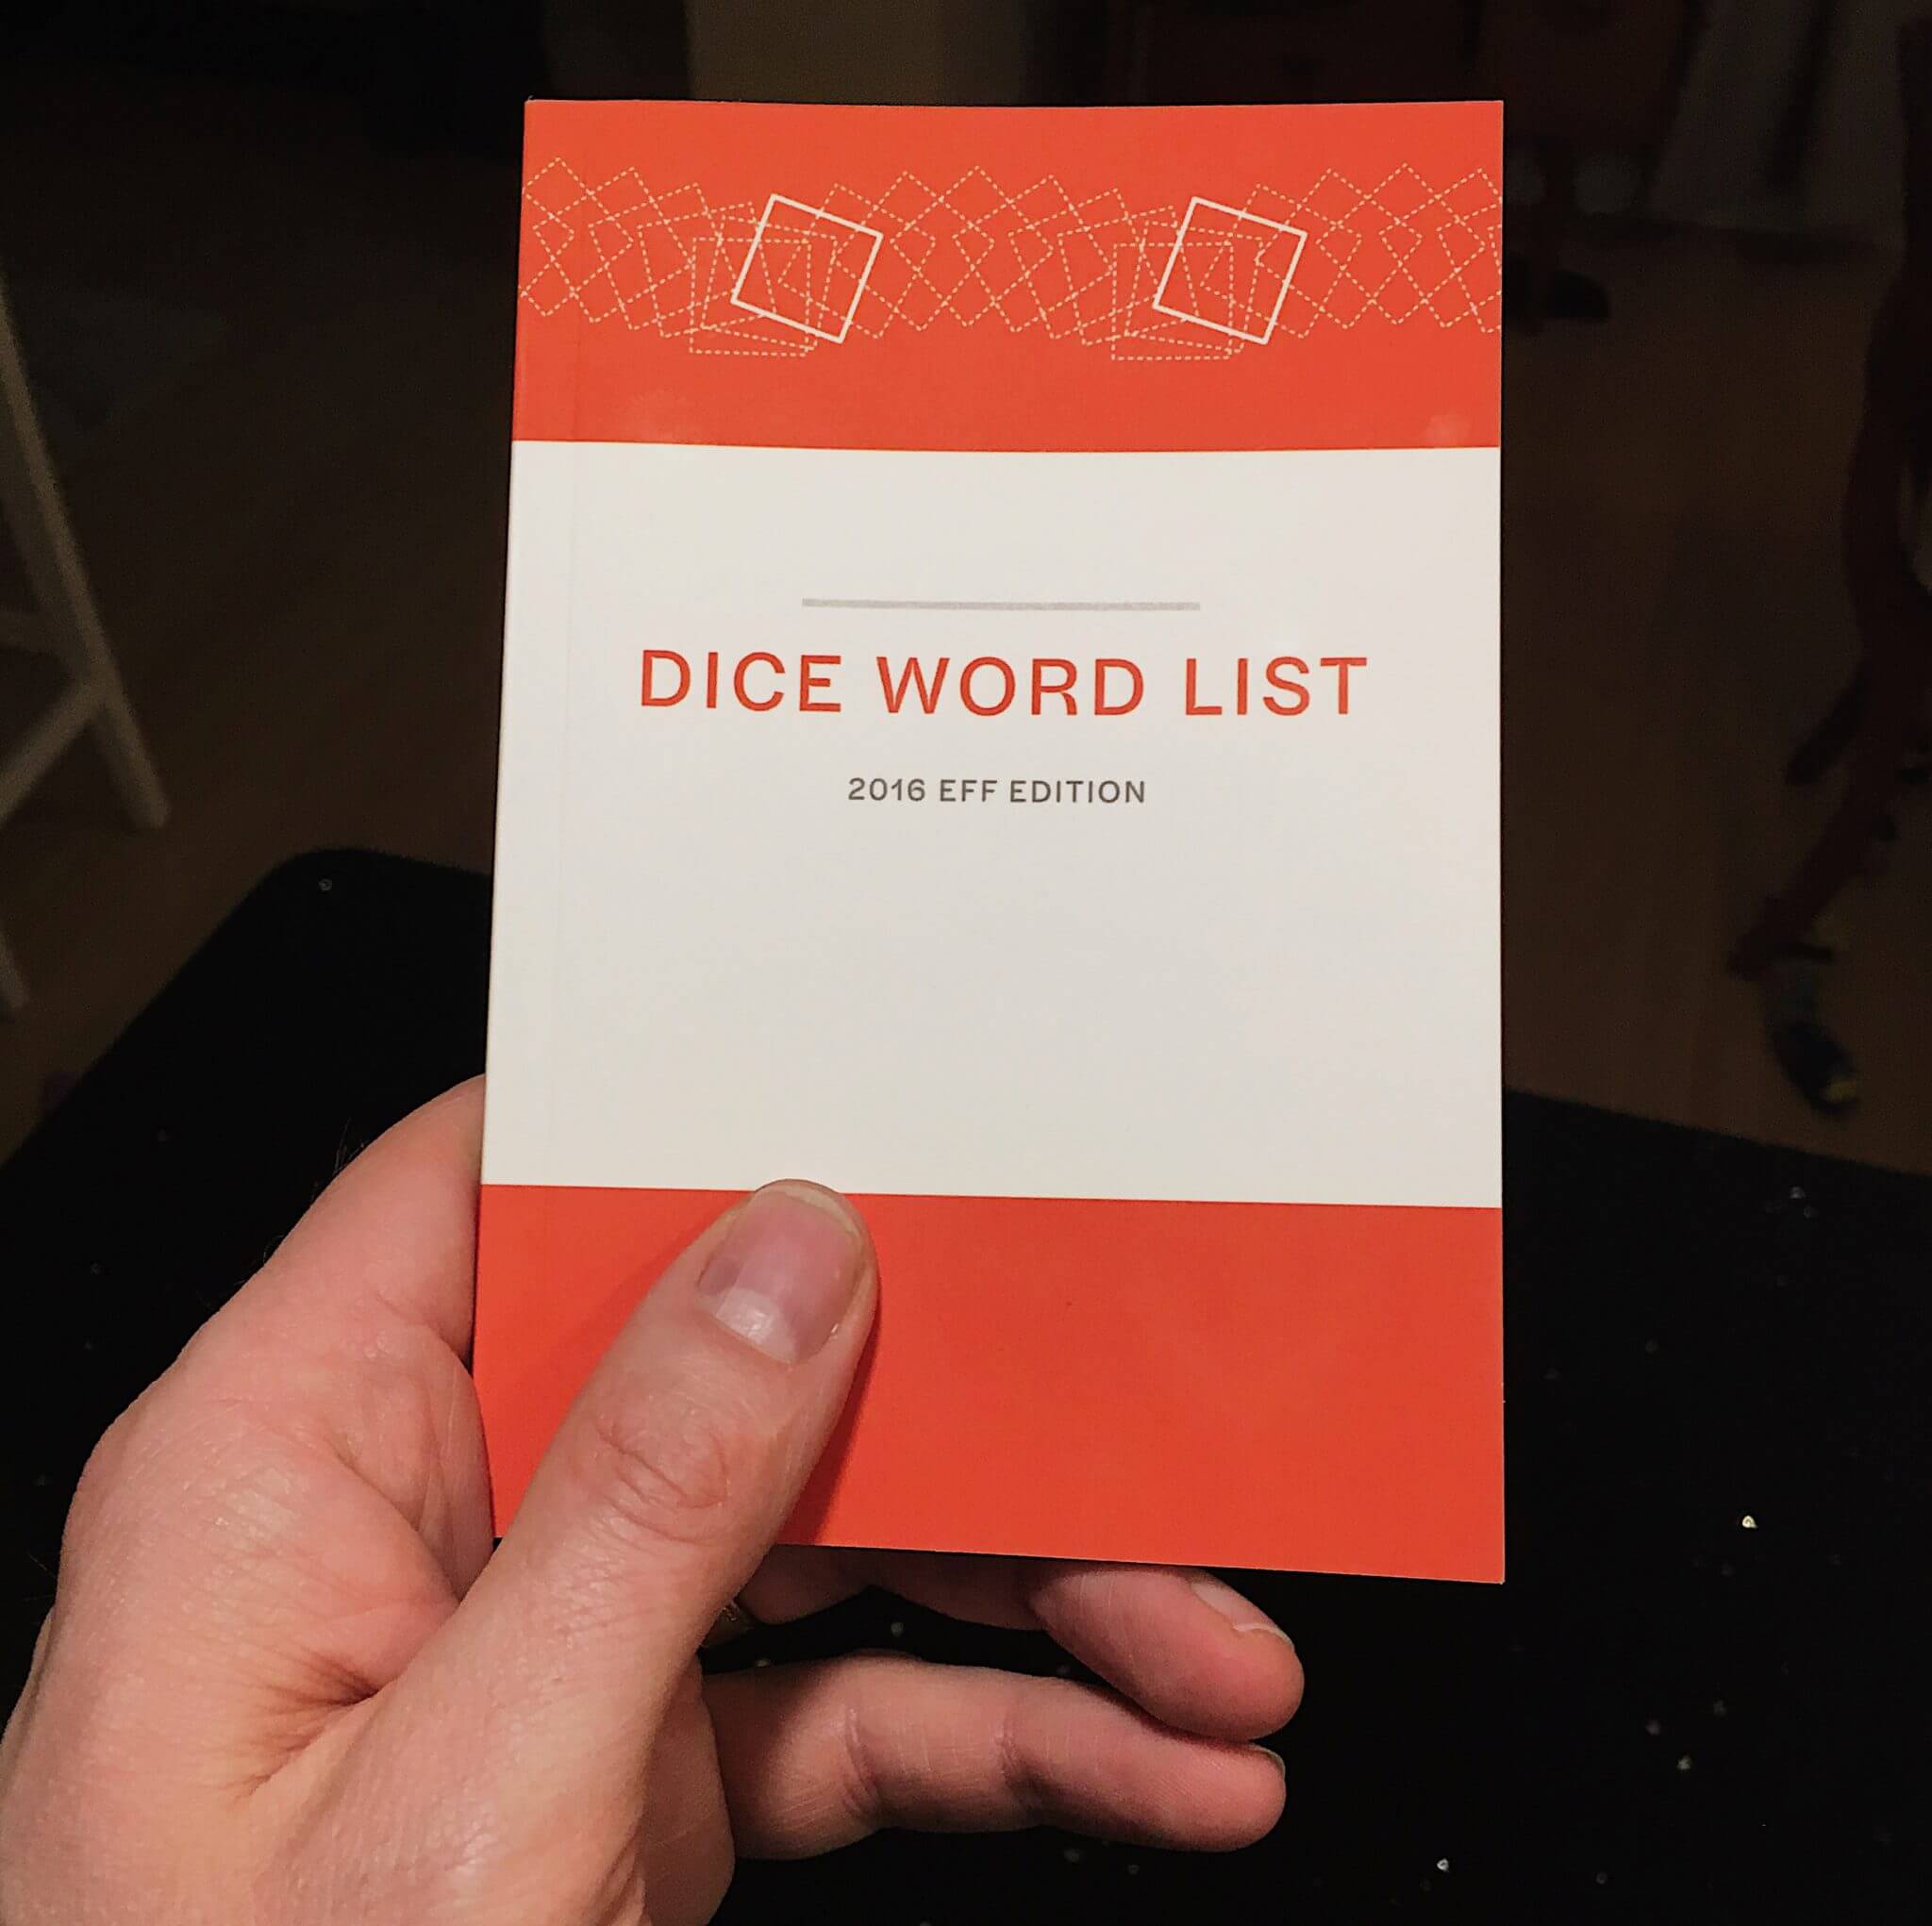 The Dice Word List book in hand